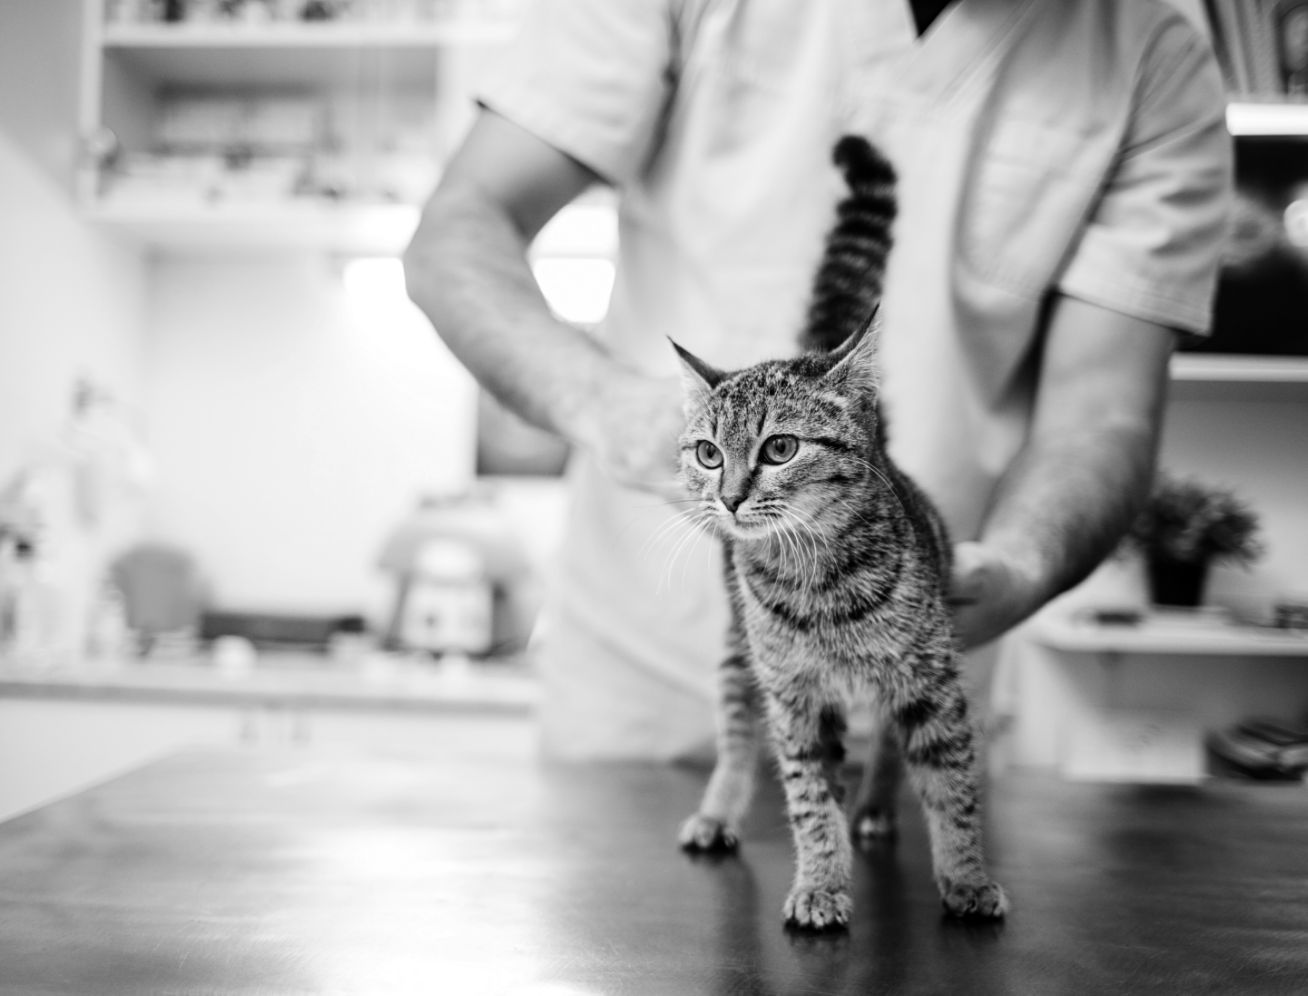 Technician holding cat on exam table, black and white.